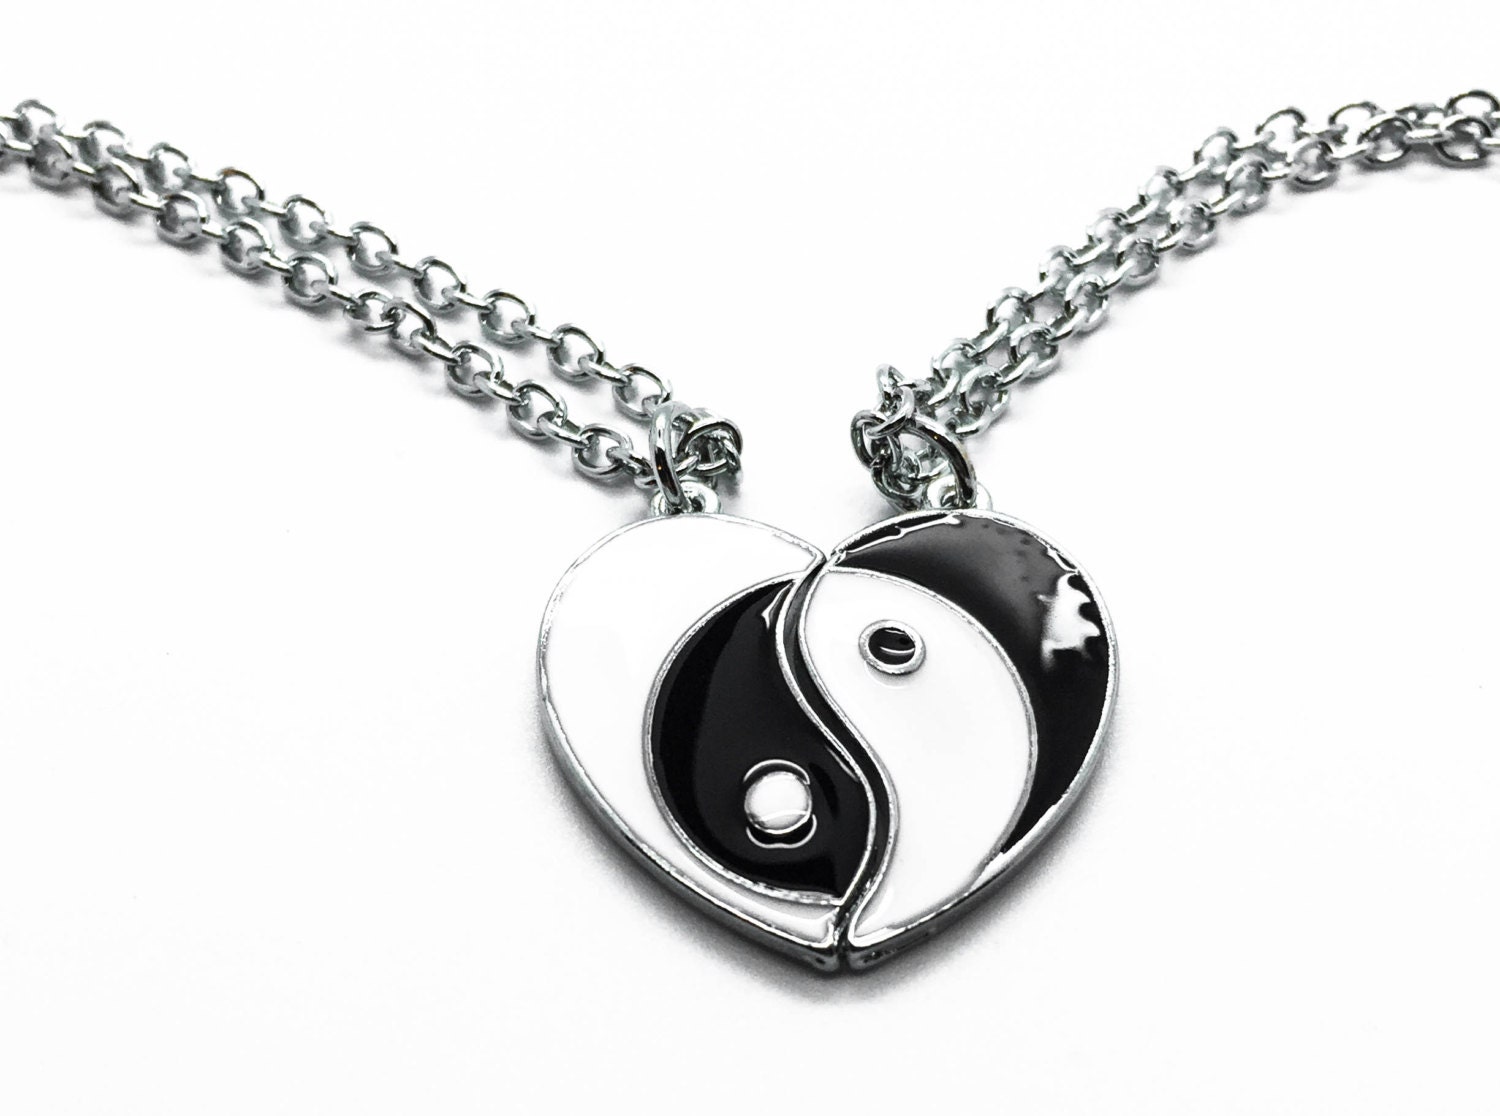 Yin Yang Necklace Bff Necklace Best Friend Necklace Yin By Cetro 